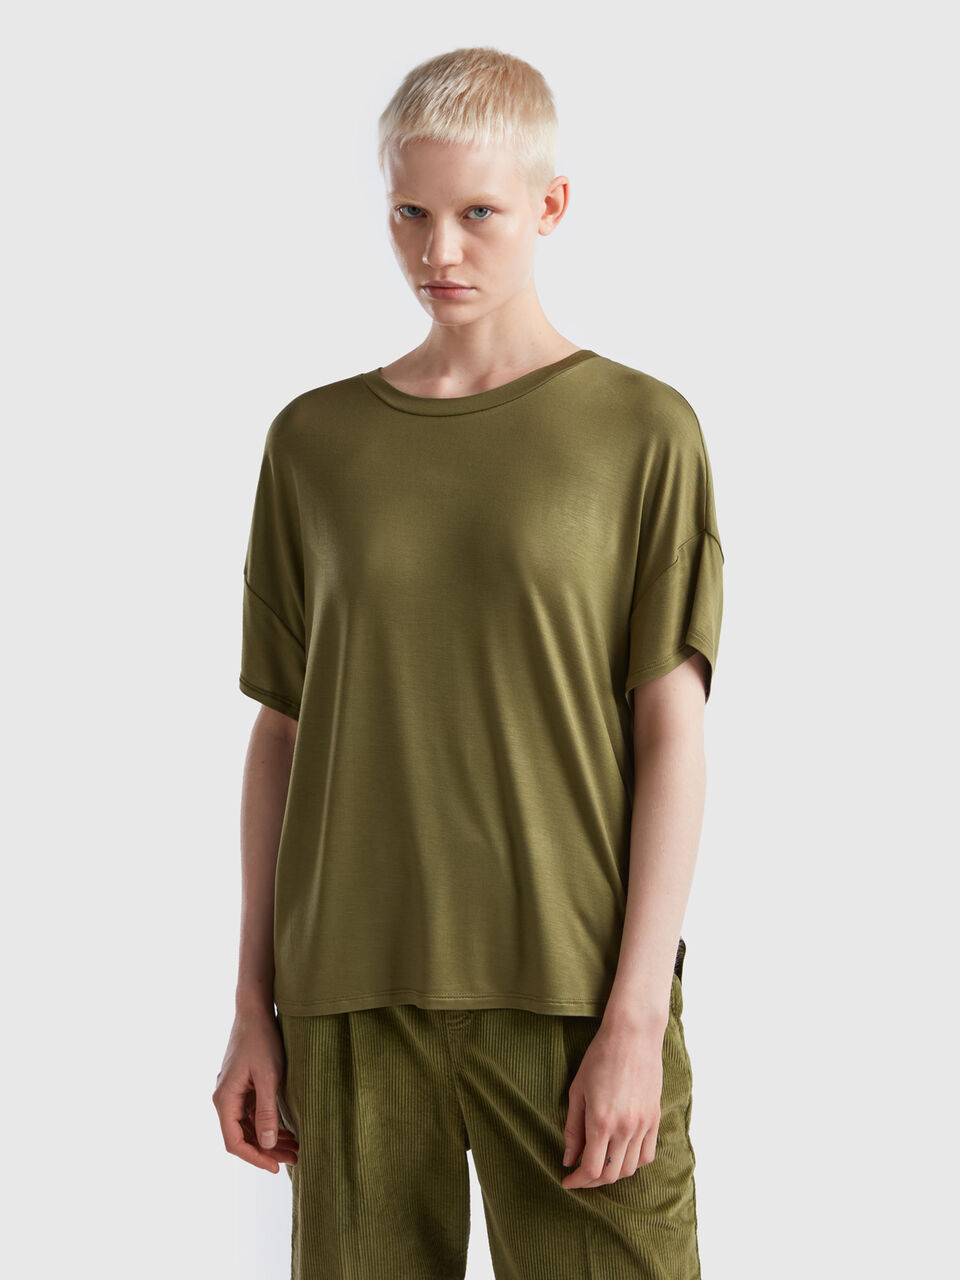 - T-shirt in | sustainable Benetton viscose Green Military stretch